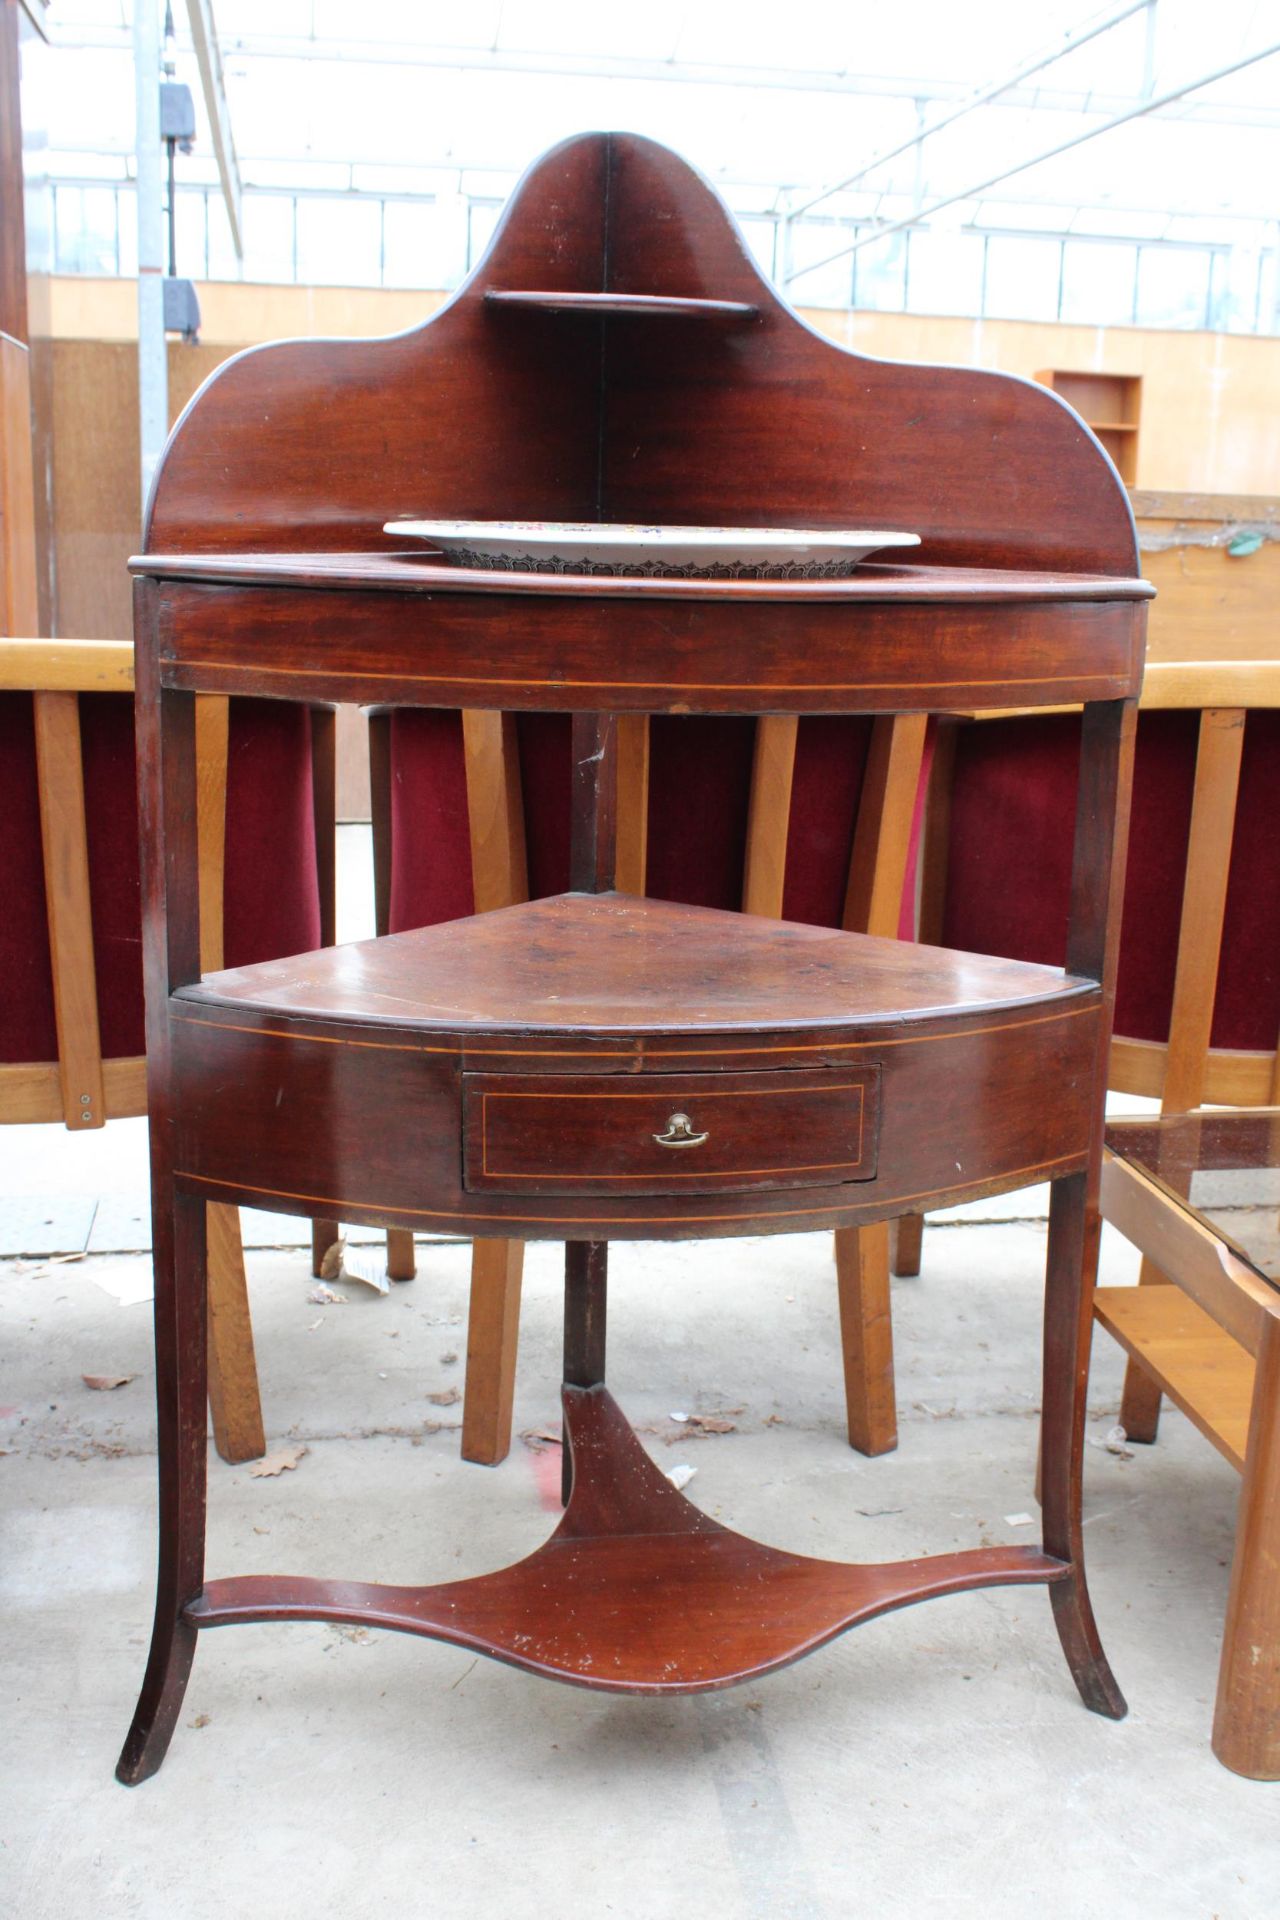 A 19TH CENTURY MAHOGANY CORNER WASHSTAND WITH CHINESE TEMPLE WASH BOWL - Image 2 of 3